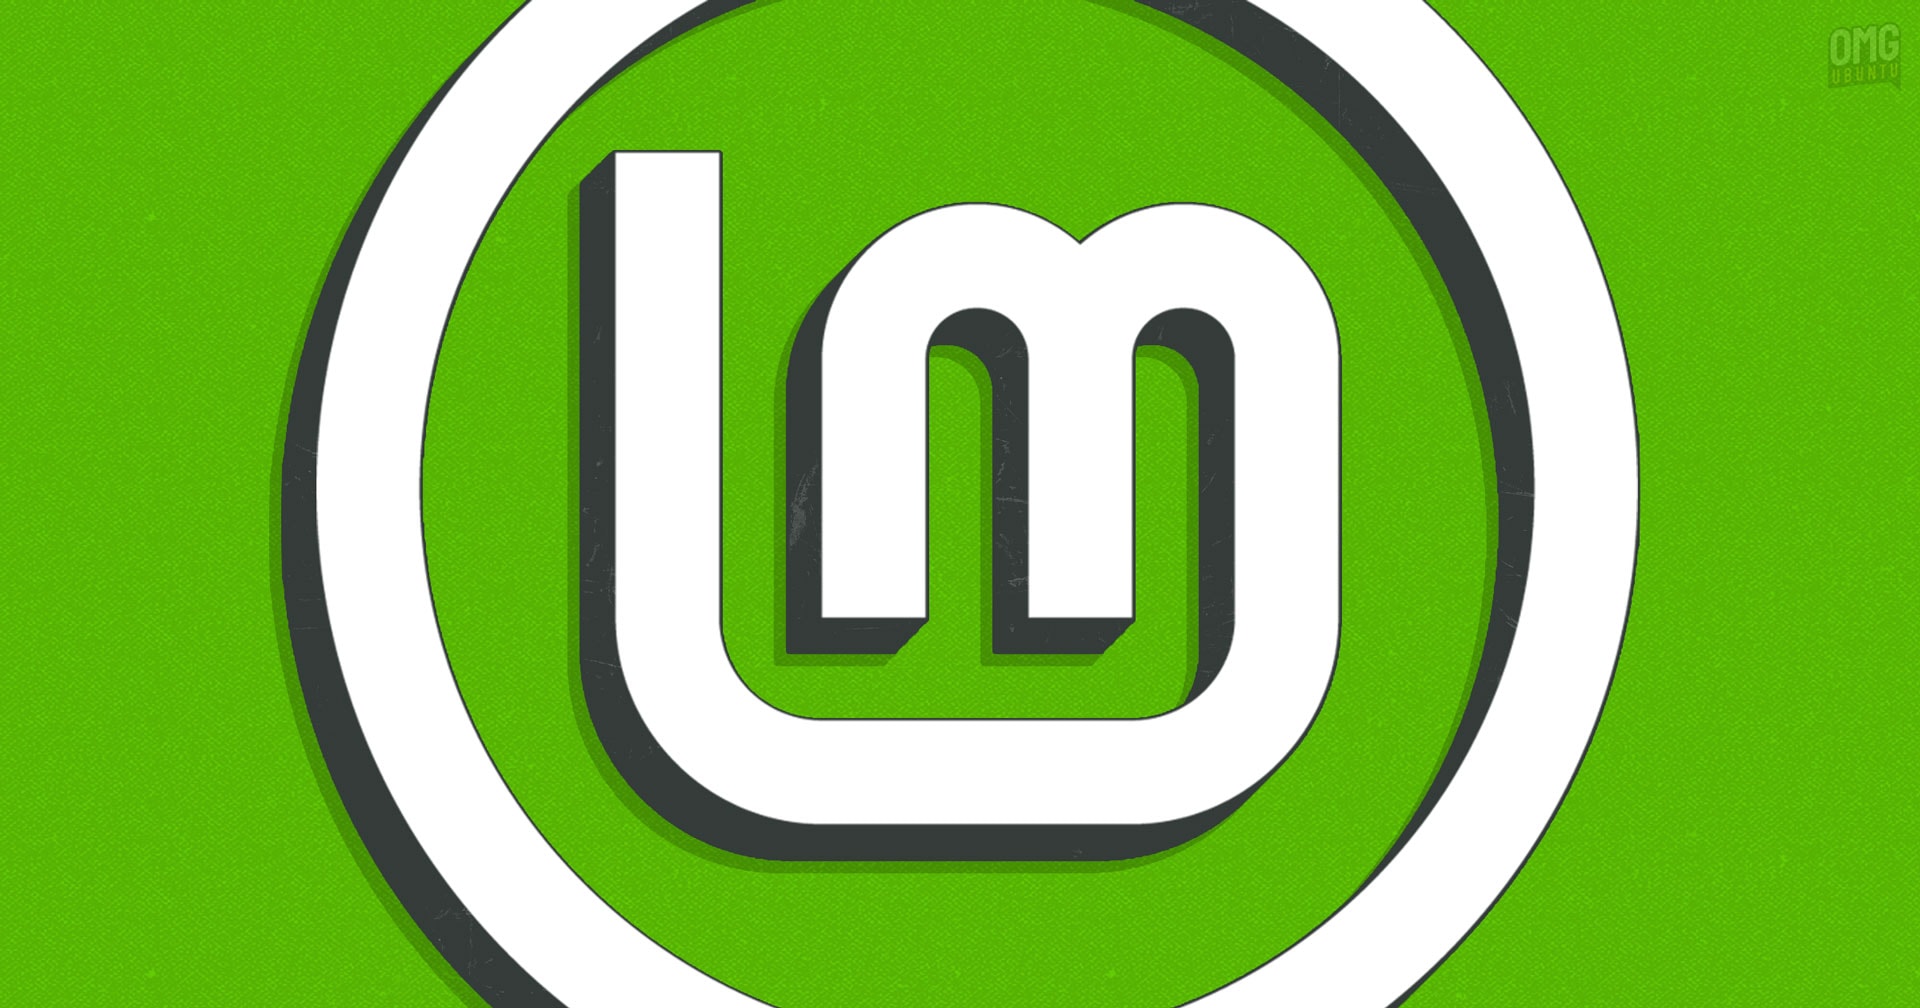 Linux Mint logo on a green background